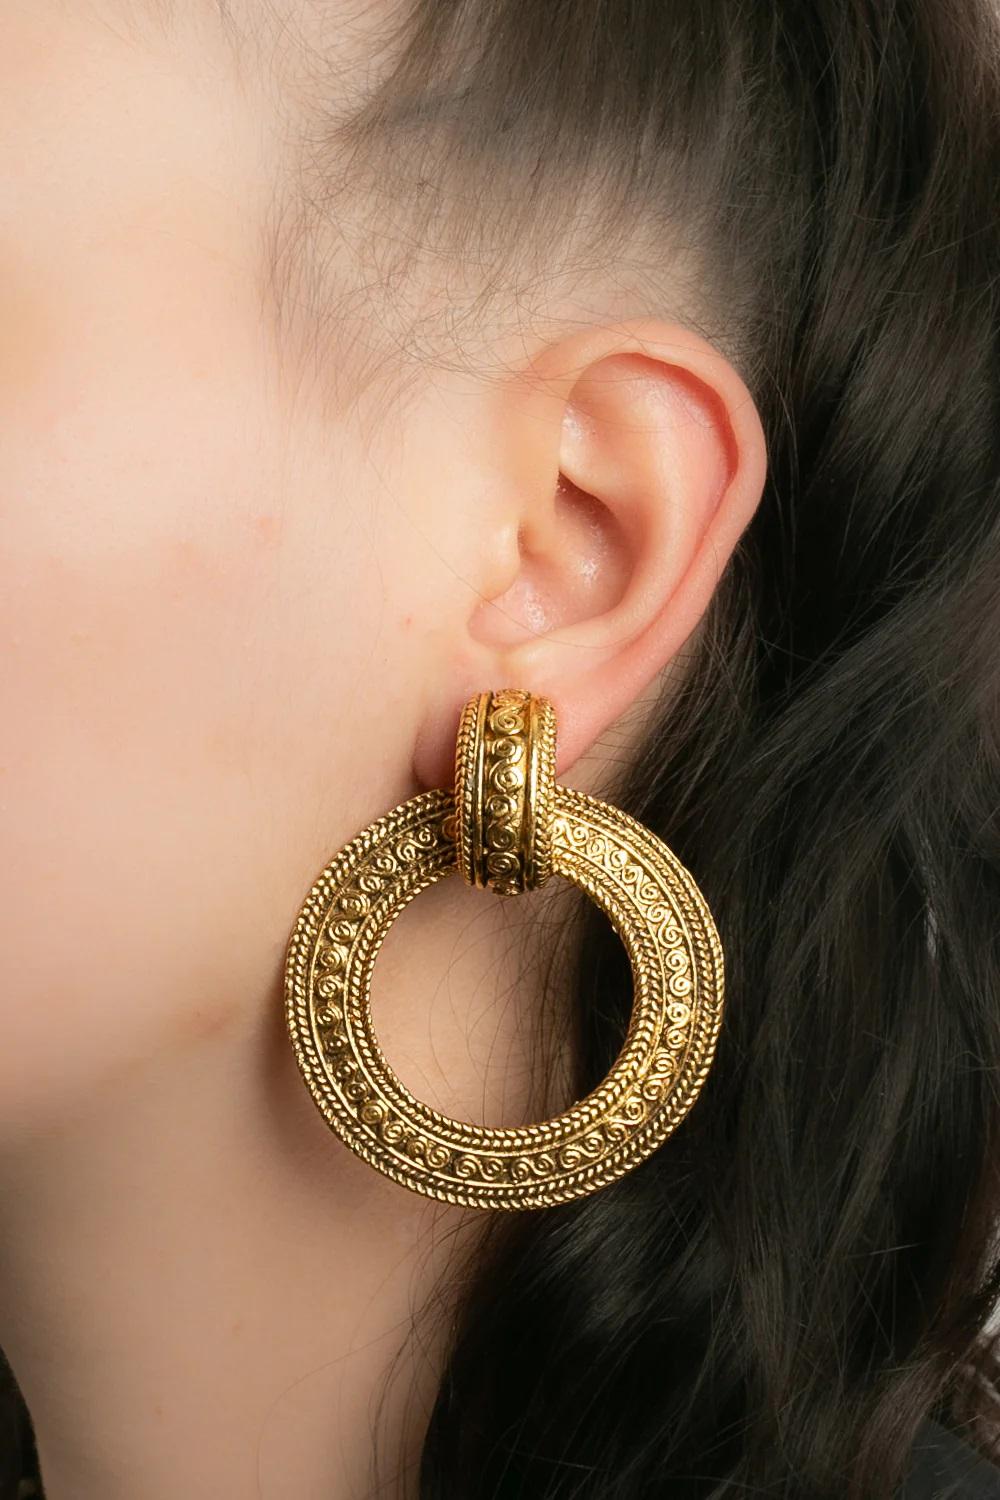 Chanel- (Made in France) Clip-on etched gilded metal round earrings.

Additional information:
Dimensions: 5 W x 6 H cm (1.96